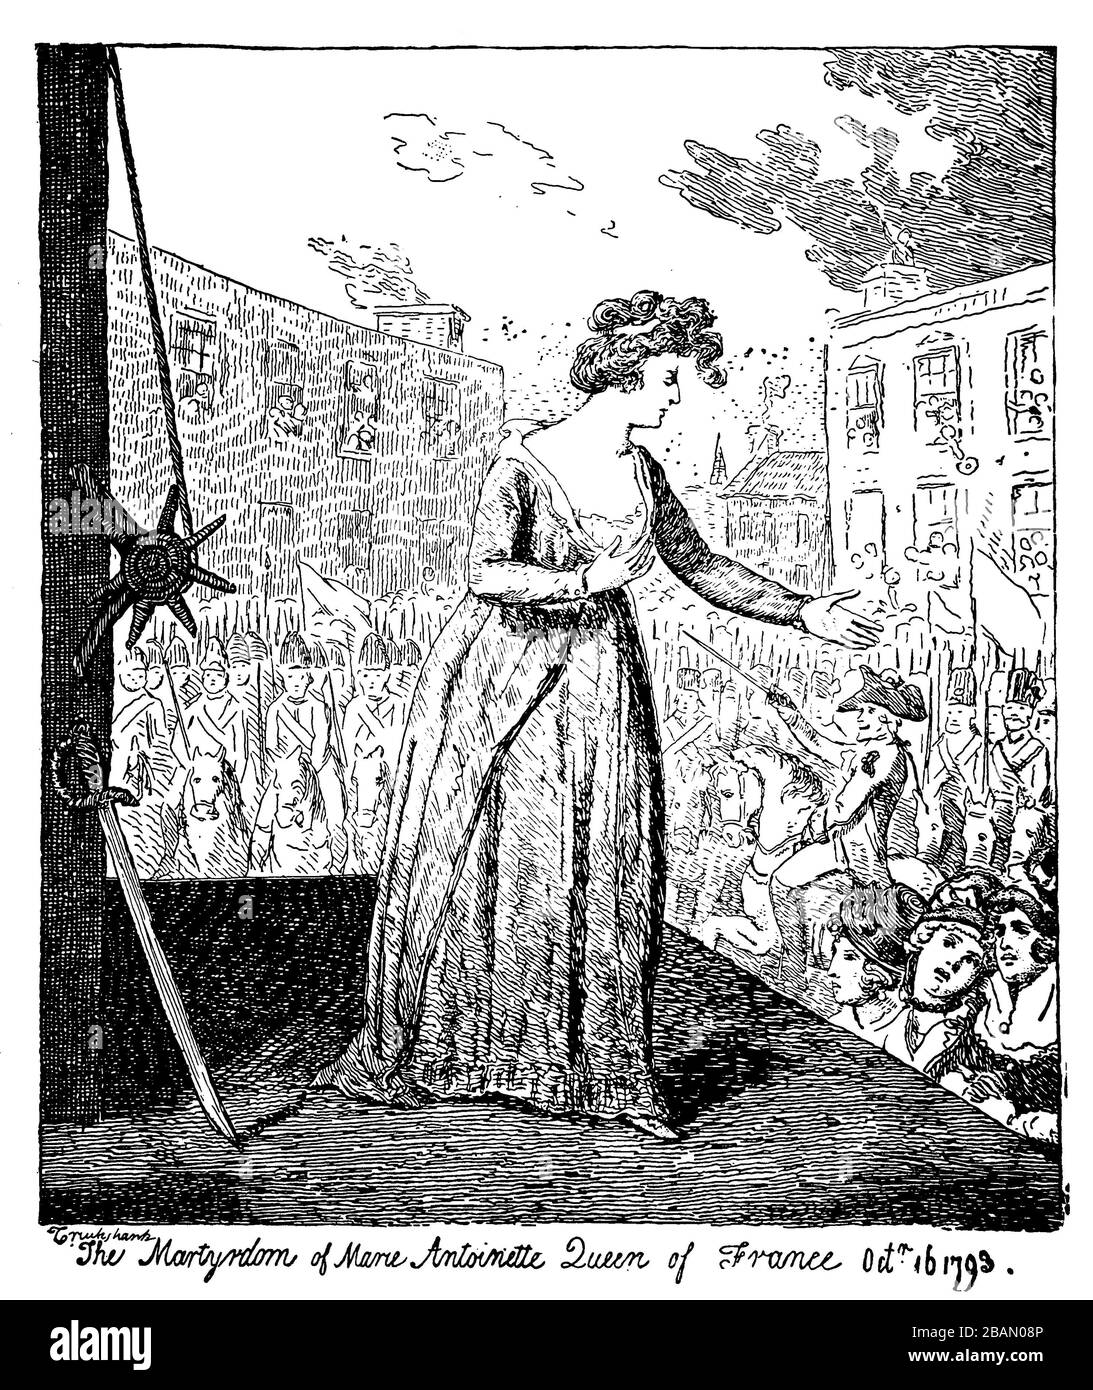 1793, Marie Antoinette Queen of France at the guillotine, vignette, caricature Stock Photo